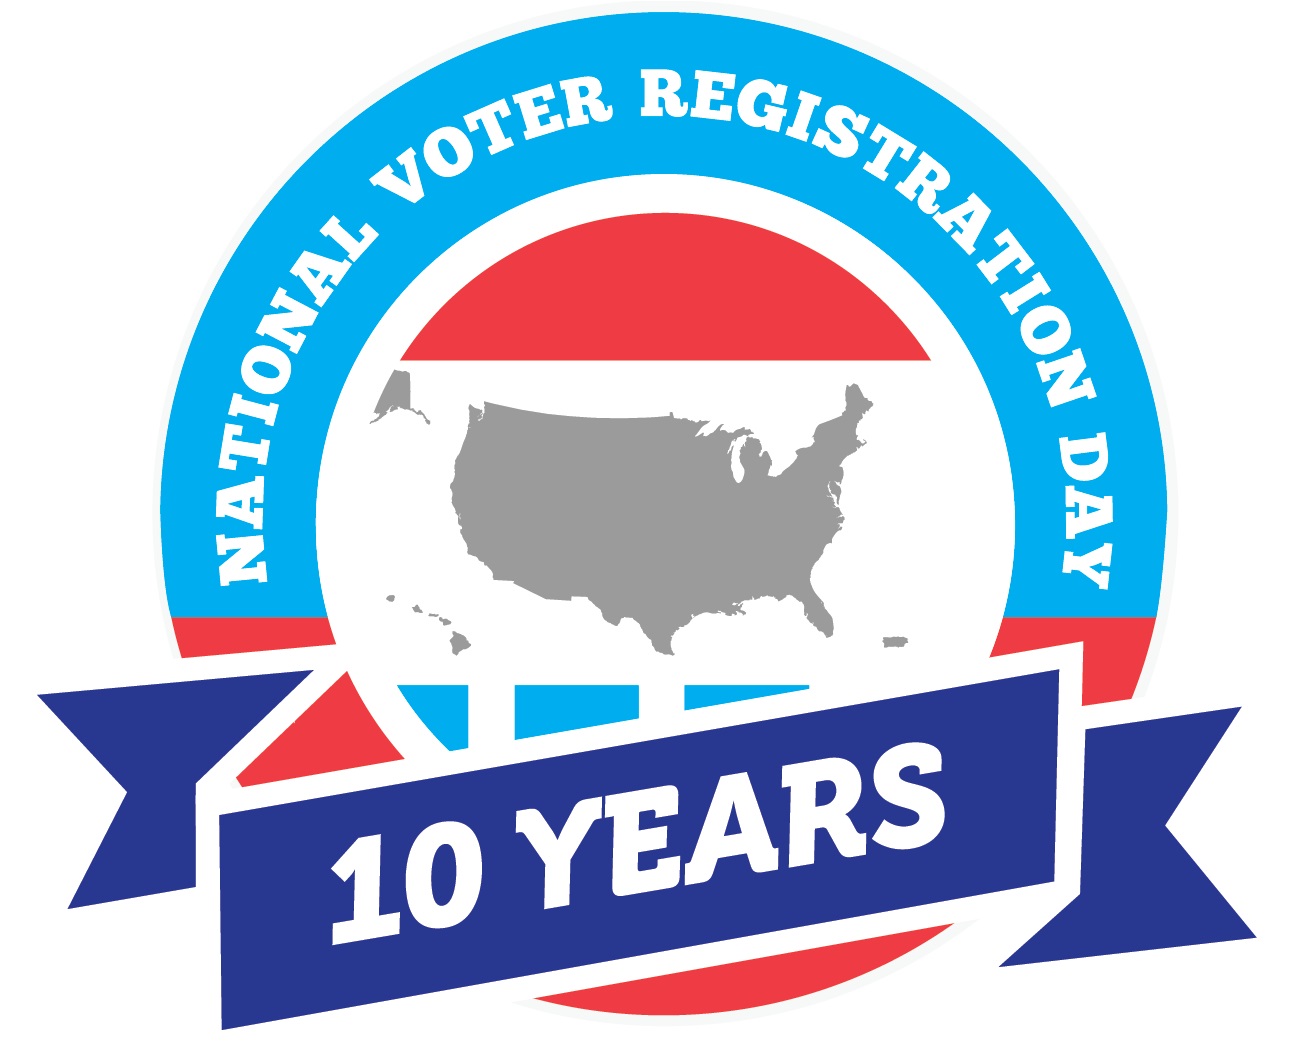 National Voter Registration day log in blue, red, and grey. There is an image of the United States in the center and a blue ribbon that says 10 years.